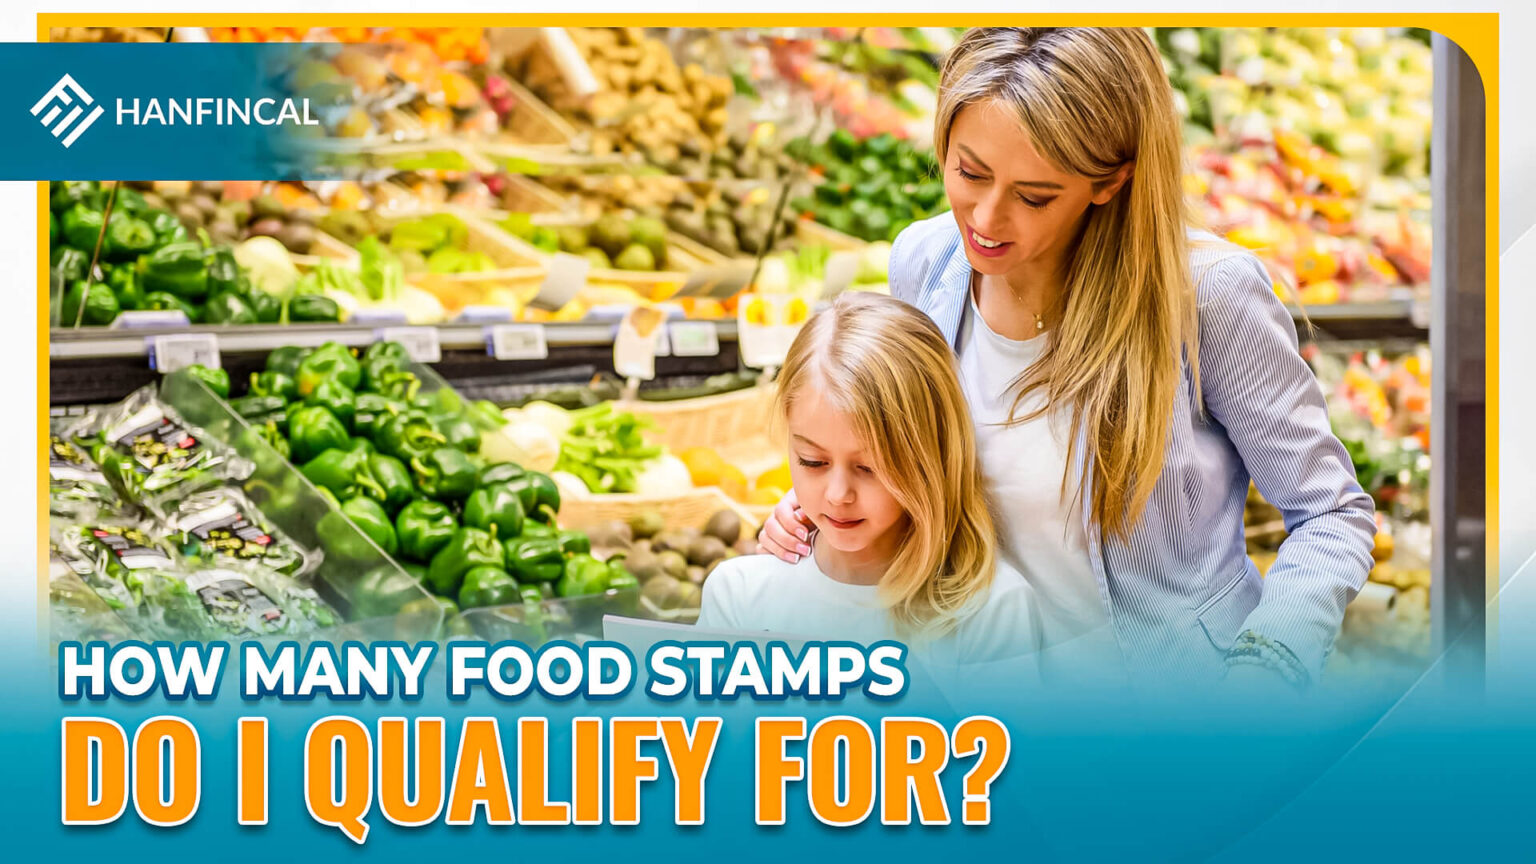 How to apply for Food Stamps in Pennsylvania (02/2023)? Hanfincal